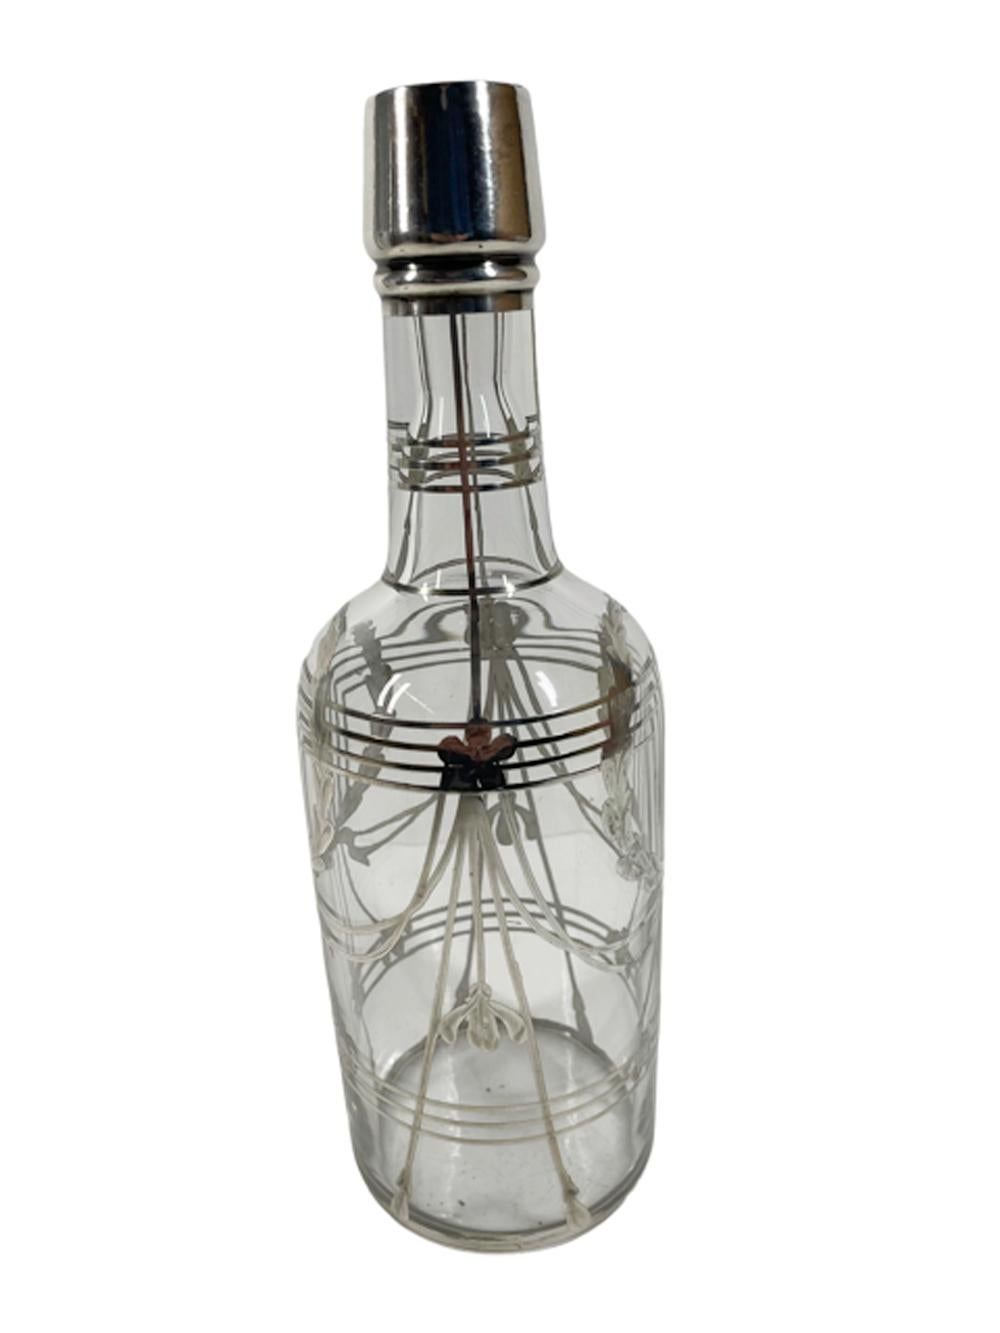 20th Century Art Deco Silver Overlay Back Bar Bottle w/Wreath and Geometric Line Pattern For Sale